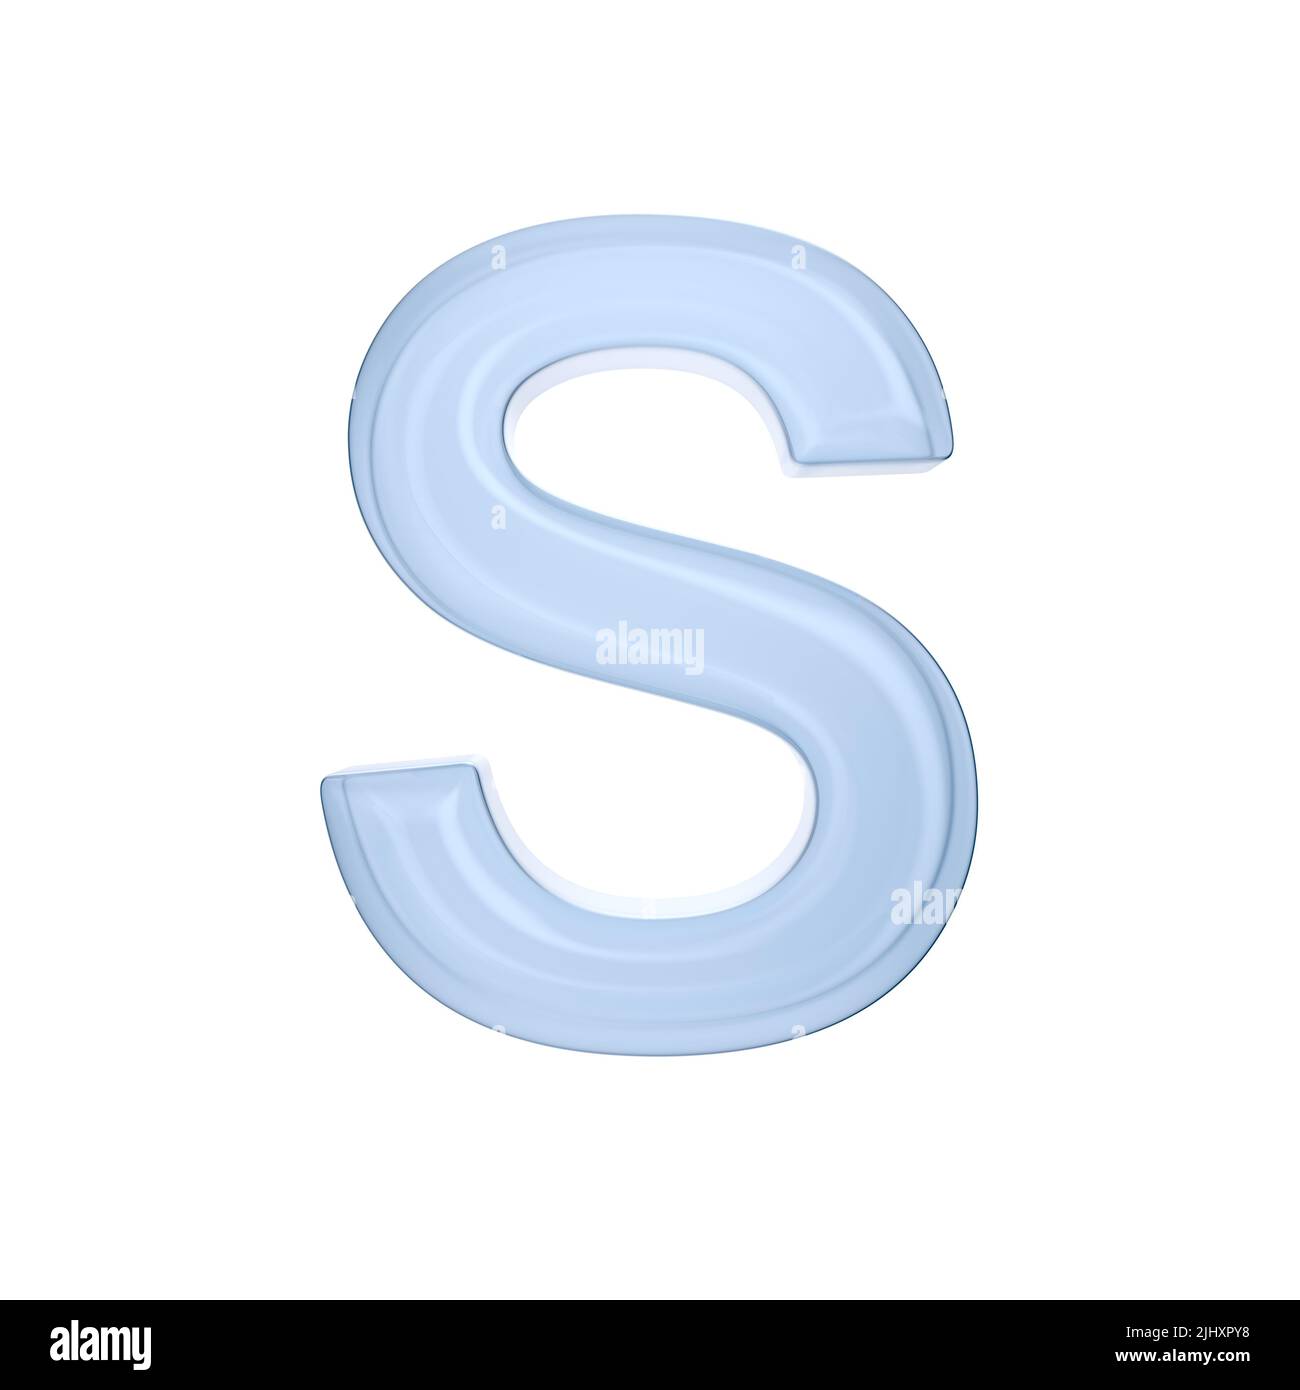 Character S on white background. Isolated 3D illustration Stock Photo